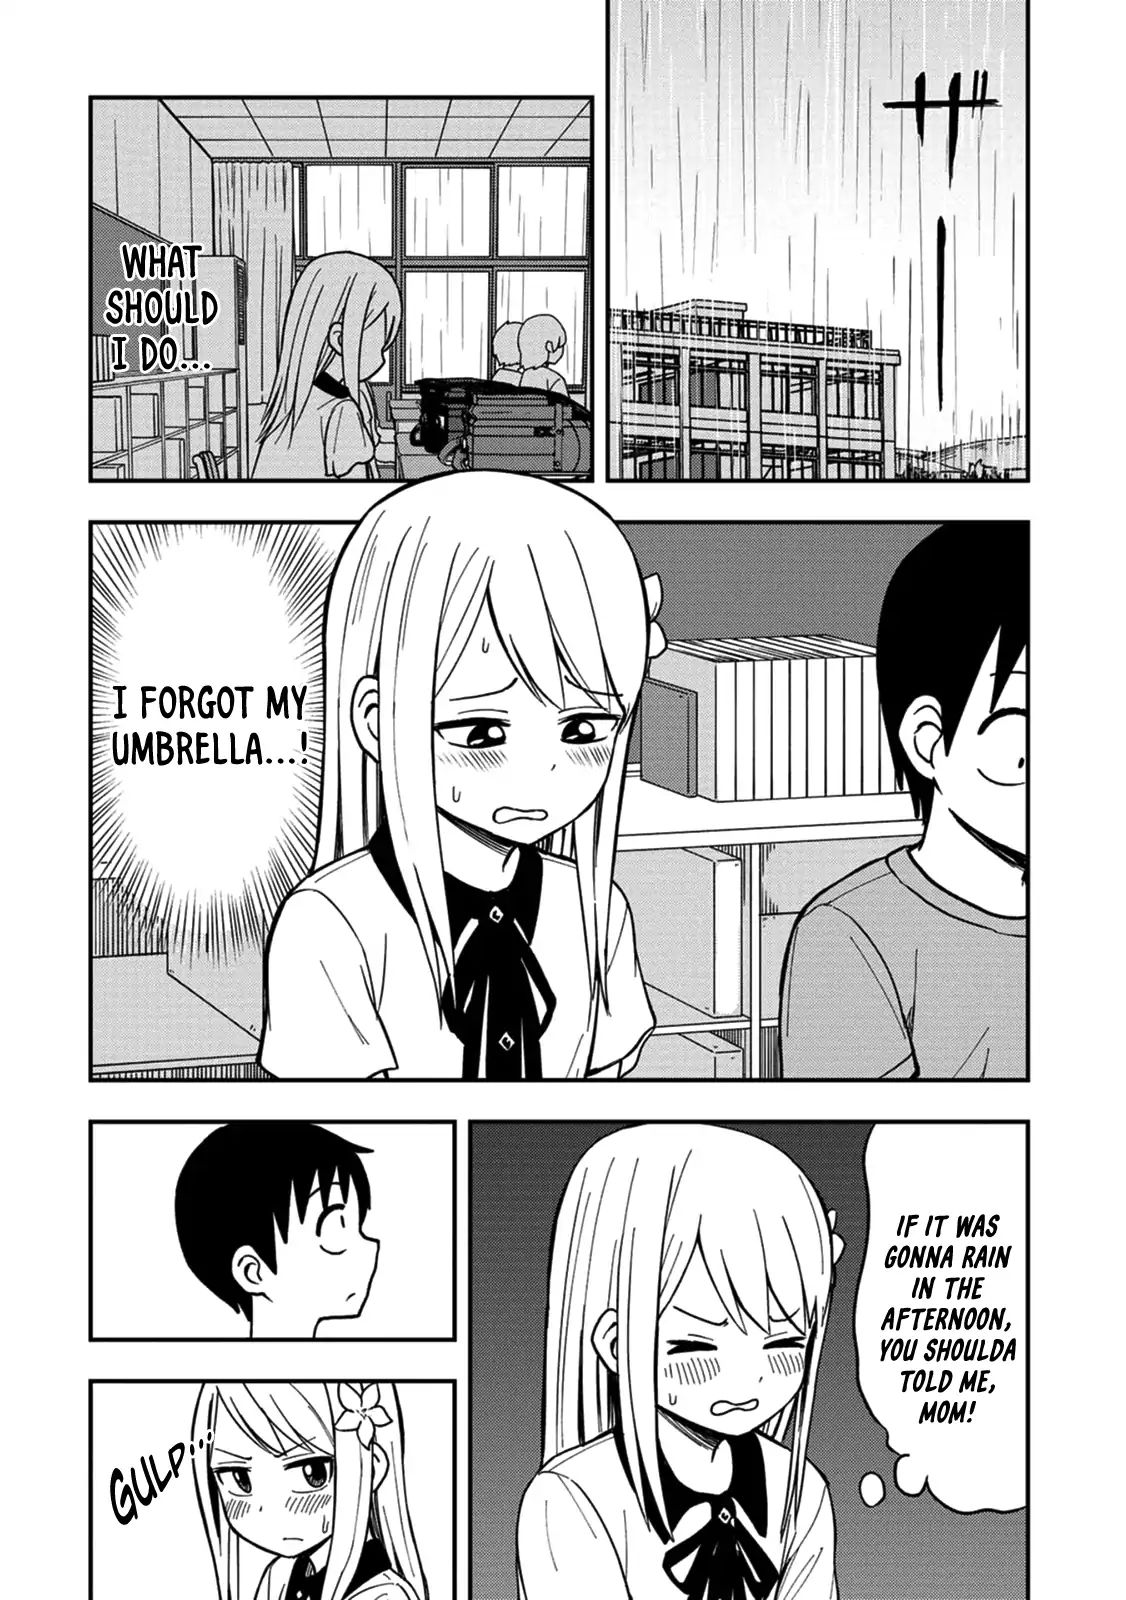 Love is Still Too Early for Himeichi-chan Chapter 6